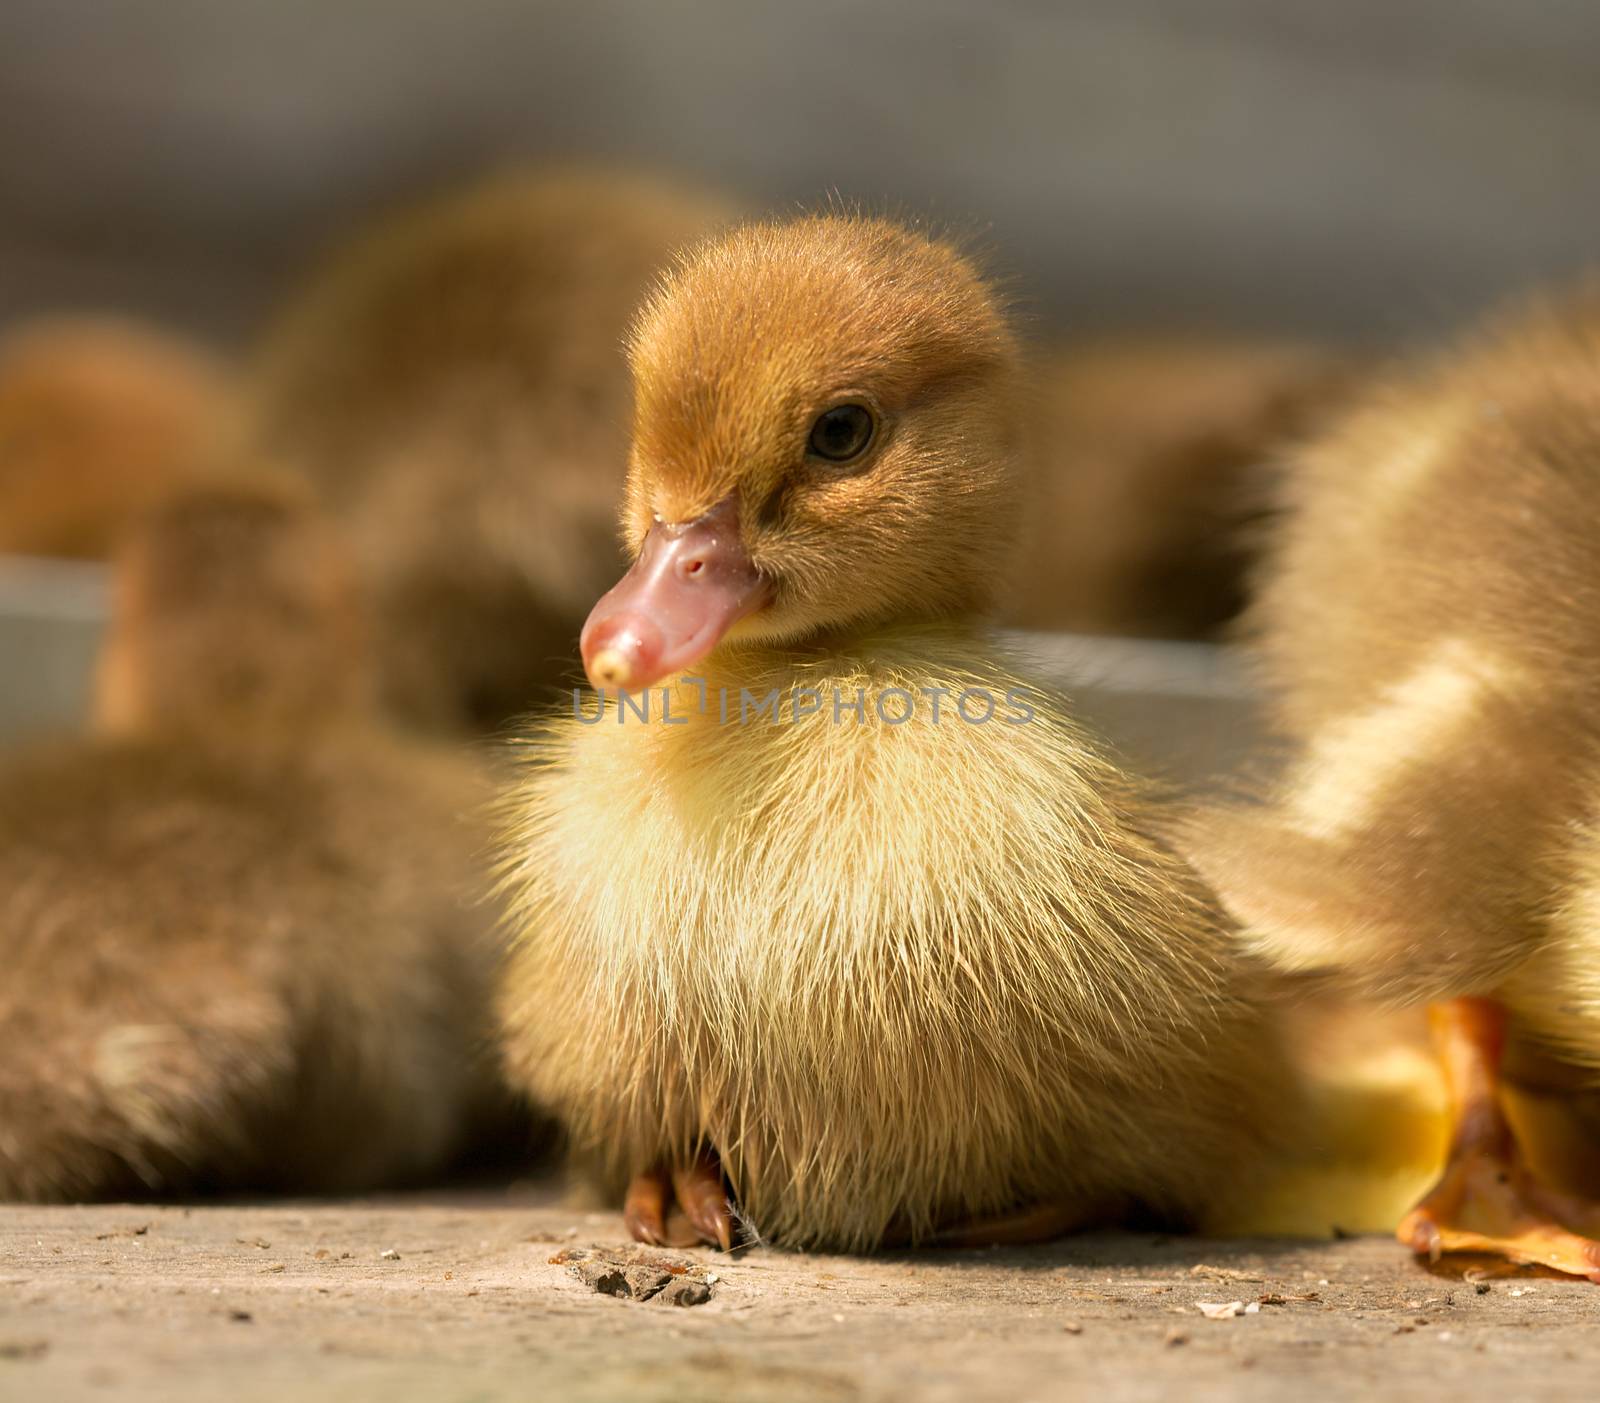 musk duck ducklings closeup on a poultry yard